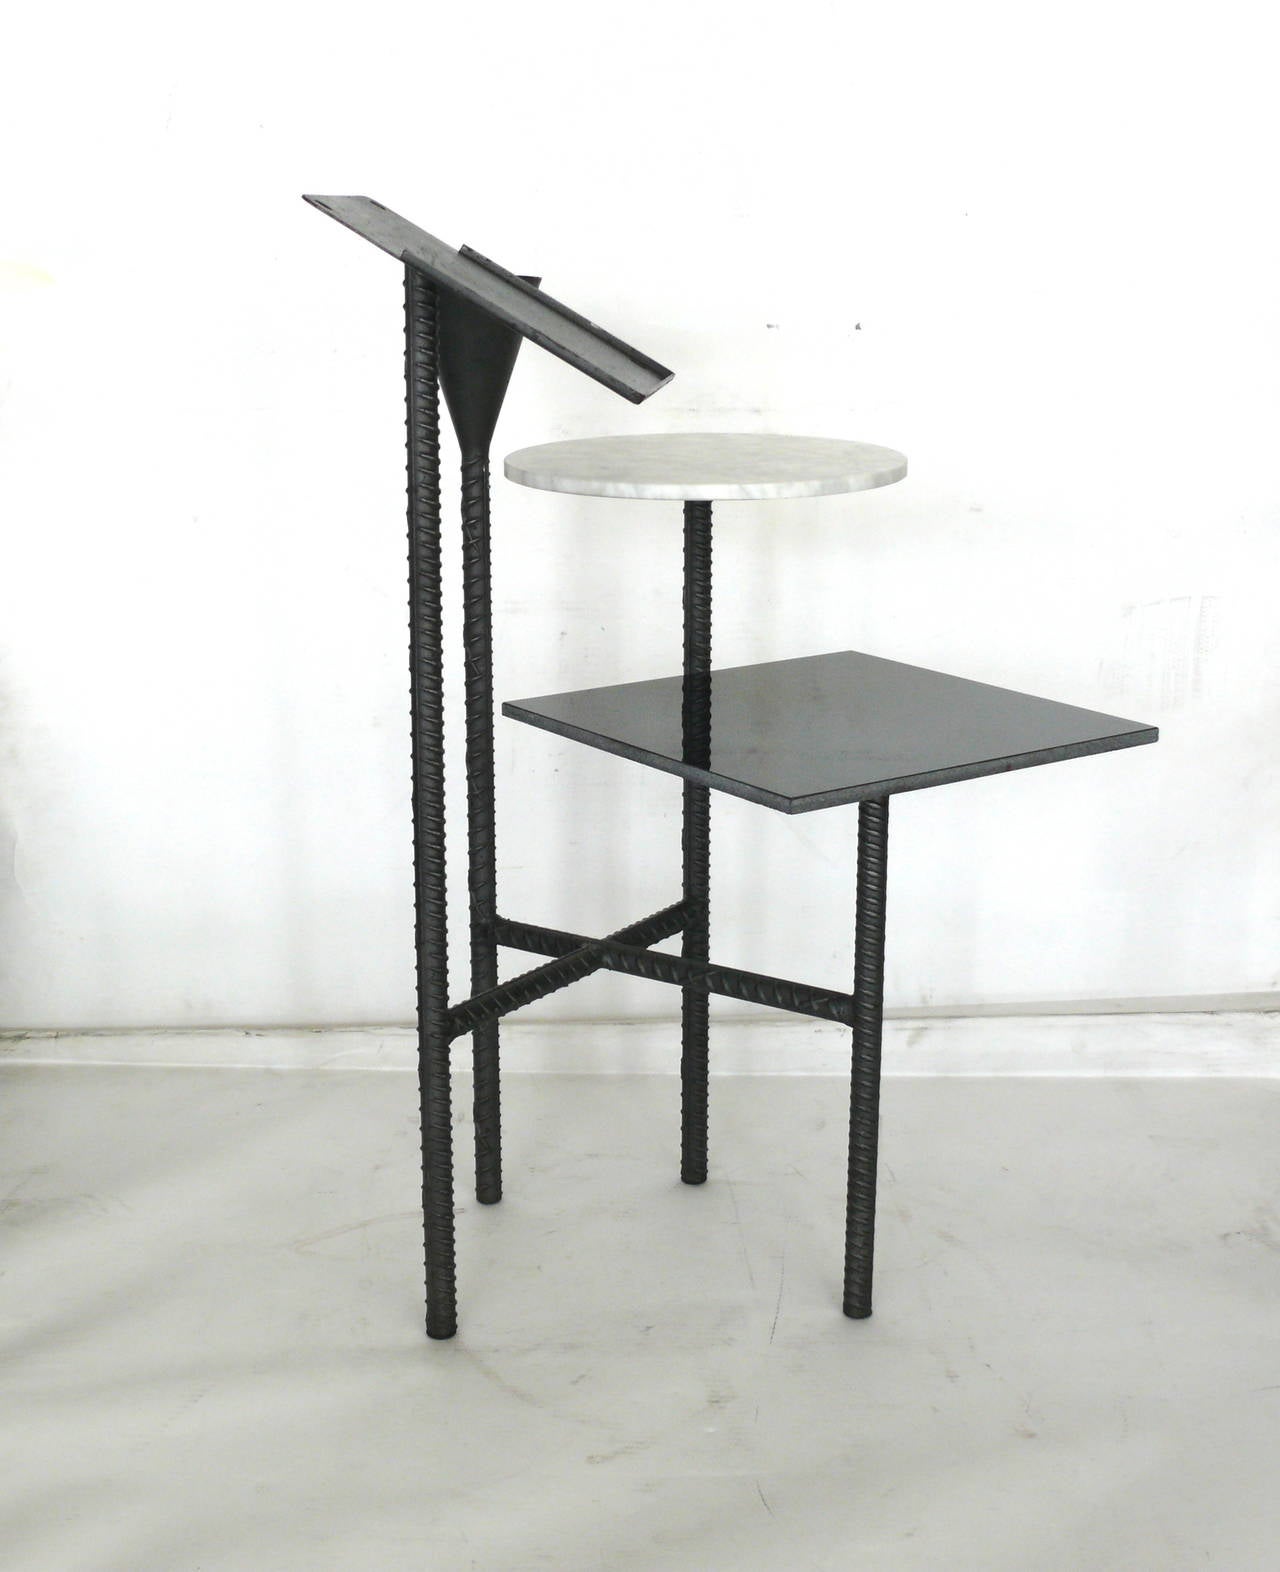 Very unique pair of telephone stands by Phillipe Starck. Rebar base with square black granite side table. Round Carrara marble table and metal candleholder. Metal tray perfect for a book or magazine. Excellent vintage condition.